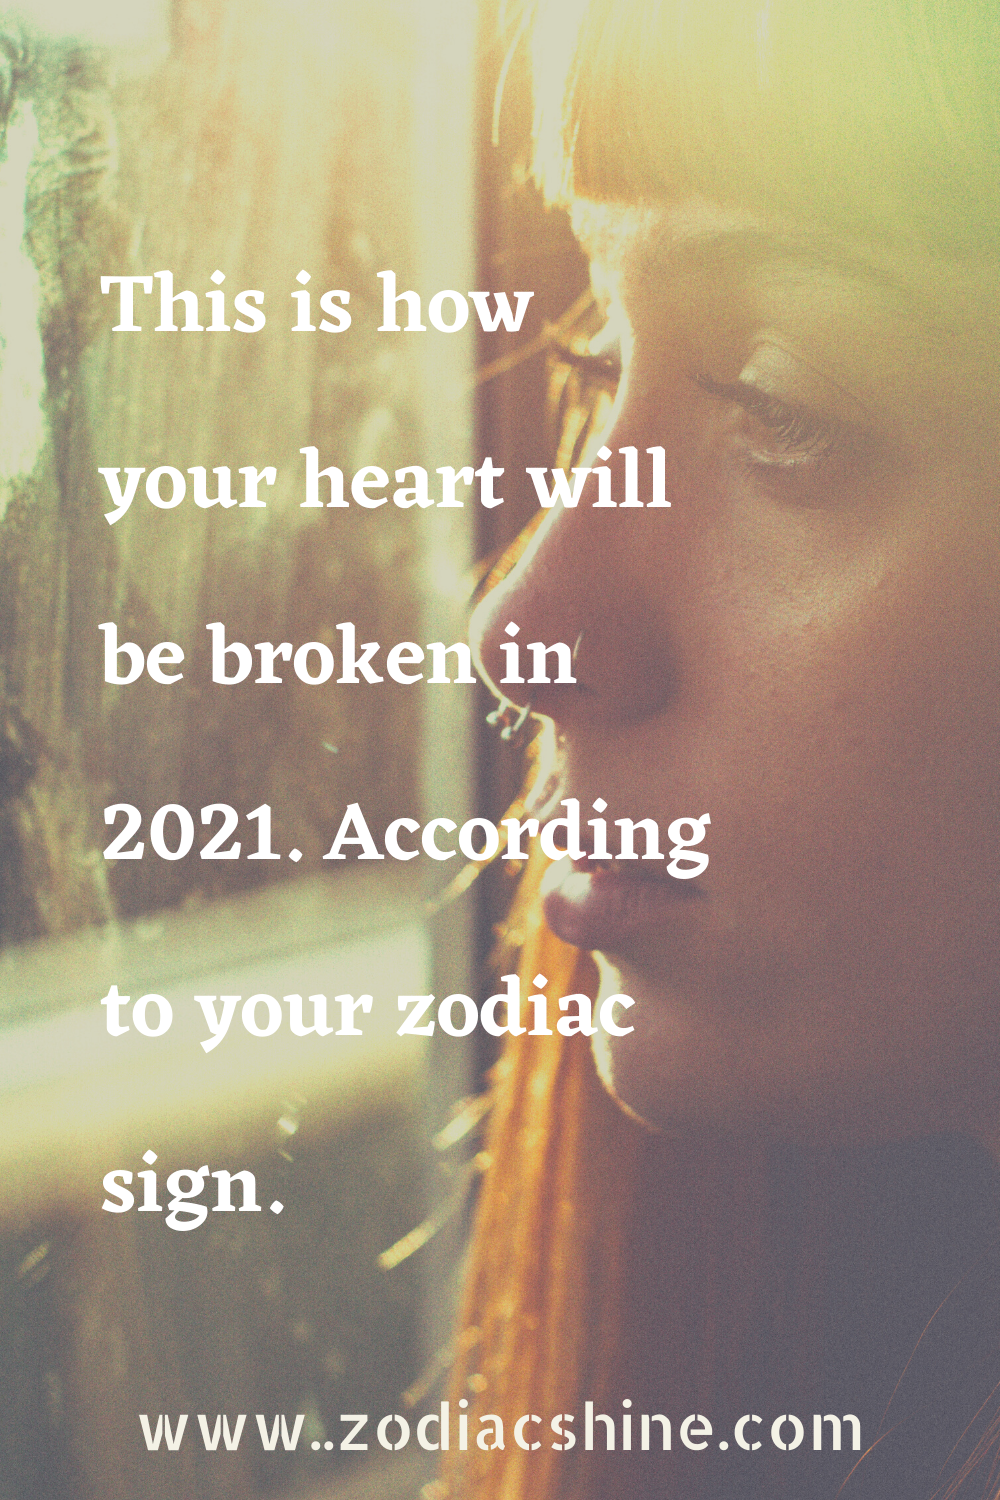 This is how your heart will be broken in 2021. According to your zodiac sign.